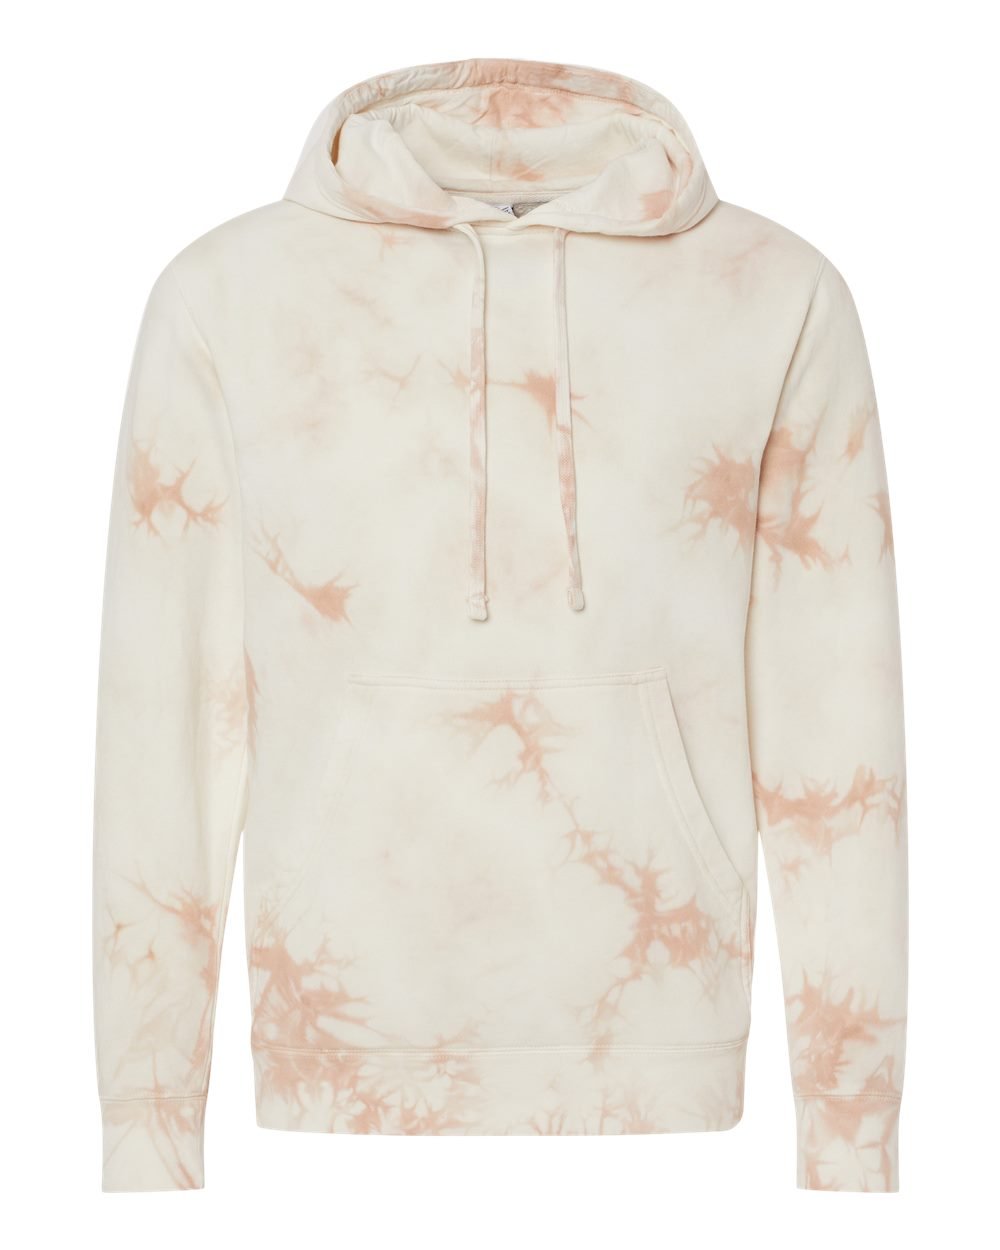 Independent_Trading_Co._PRM4500TD_Tie_Dye_Dusty_Pink_Front_High.jpg